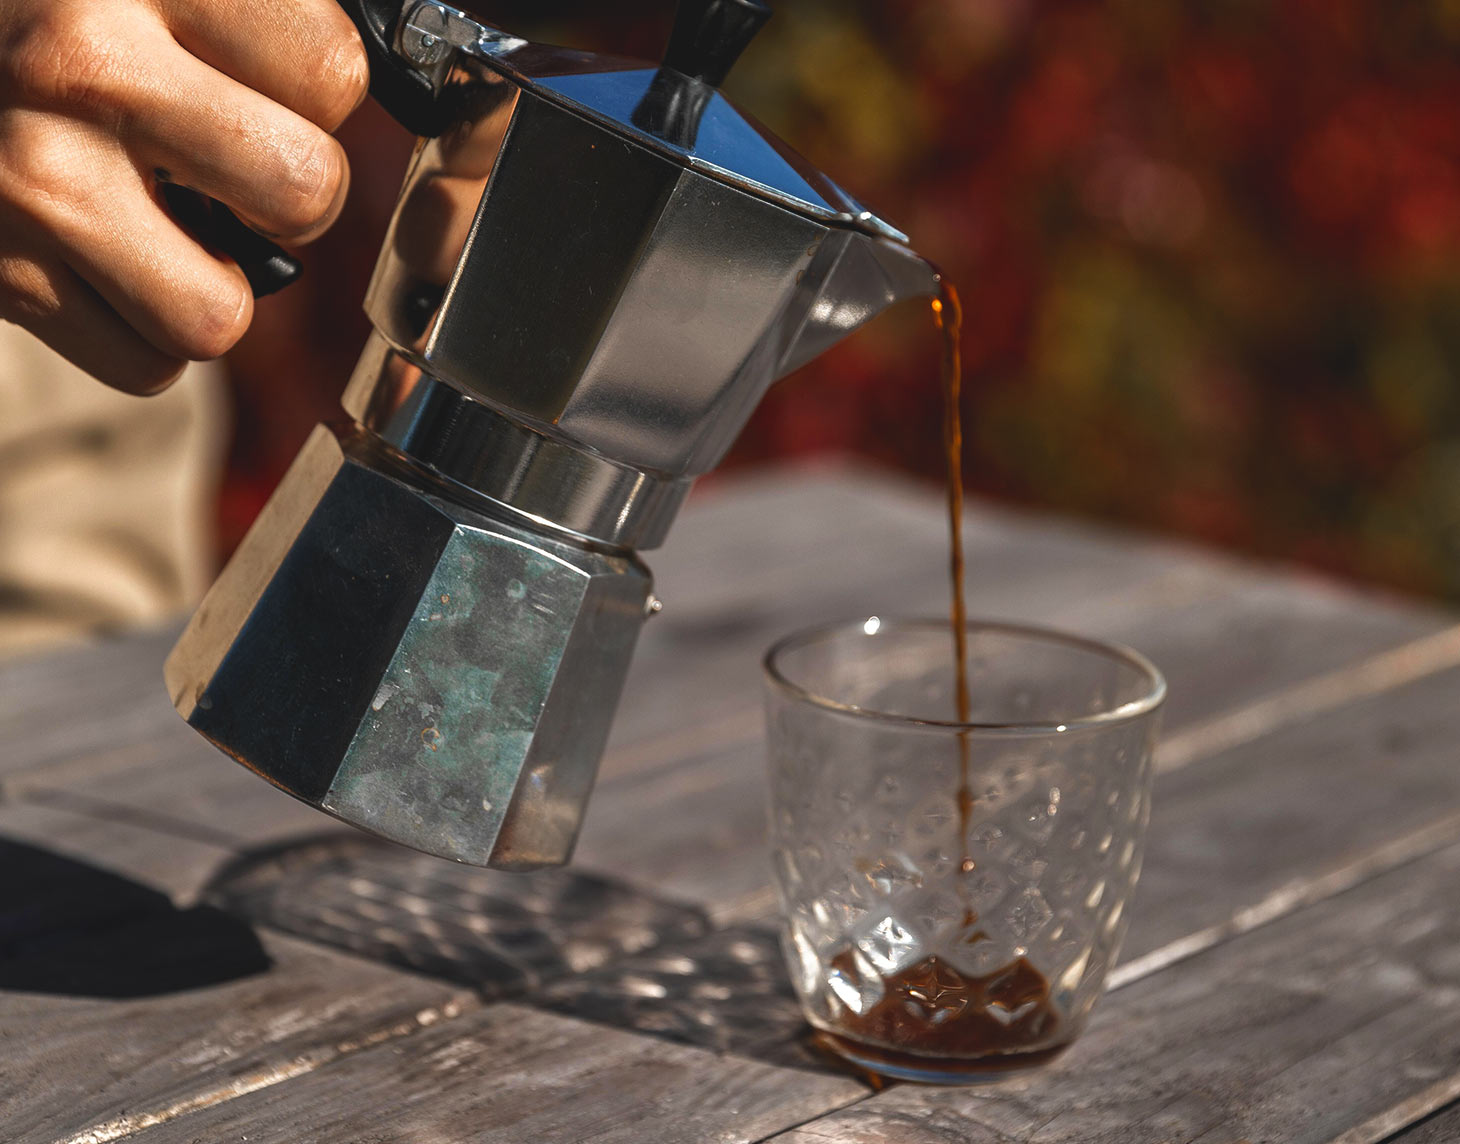 How to Make Espresso at Home (With or Without a Machine)